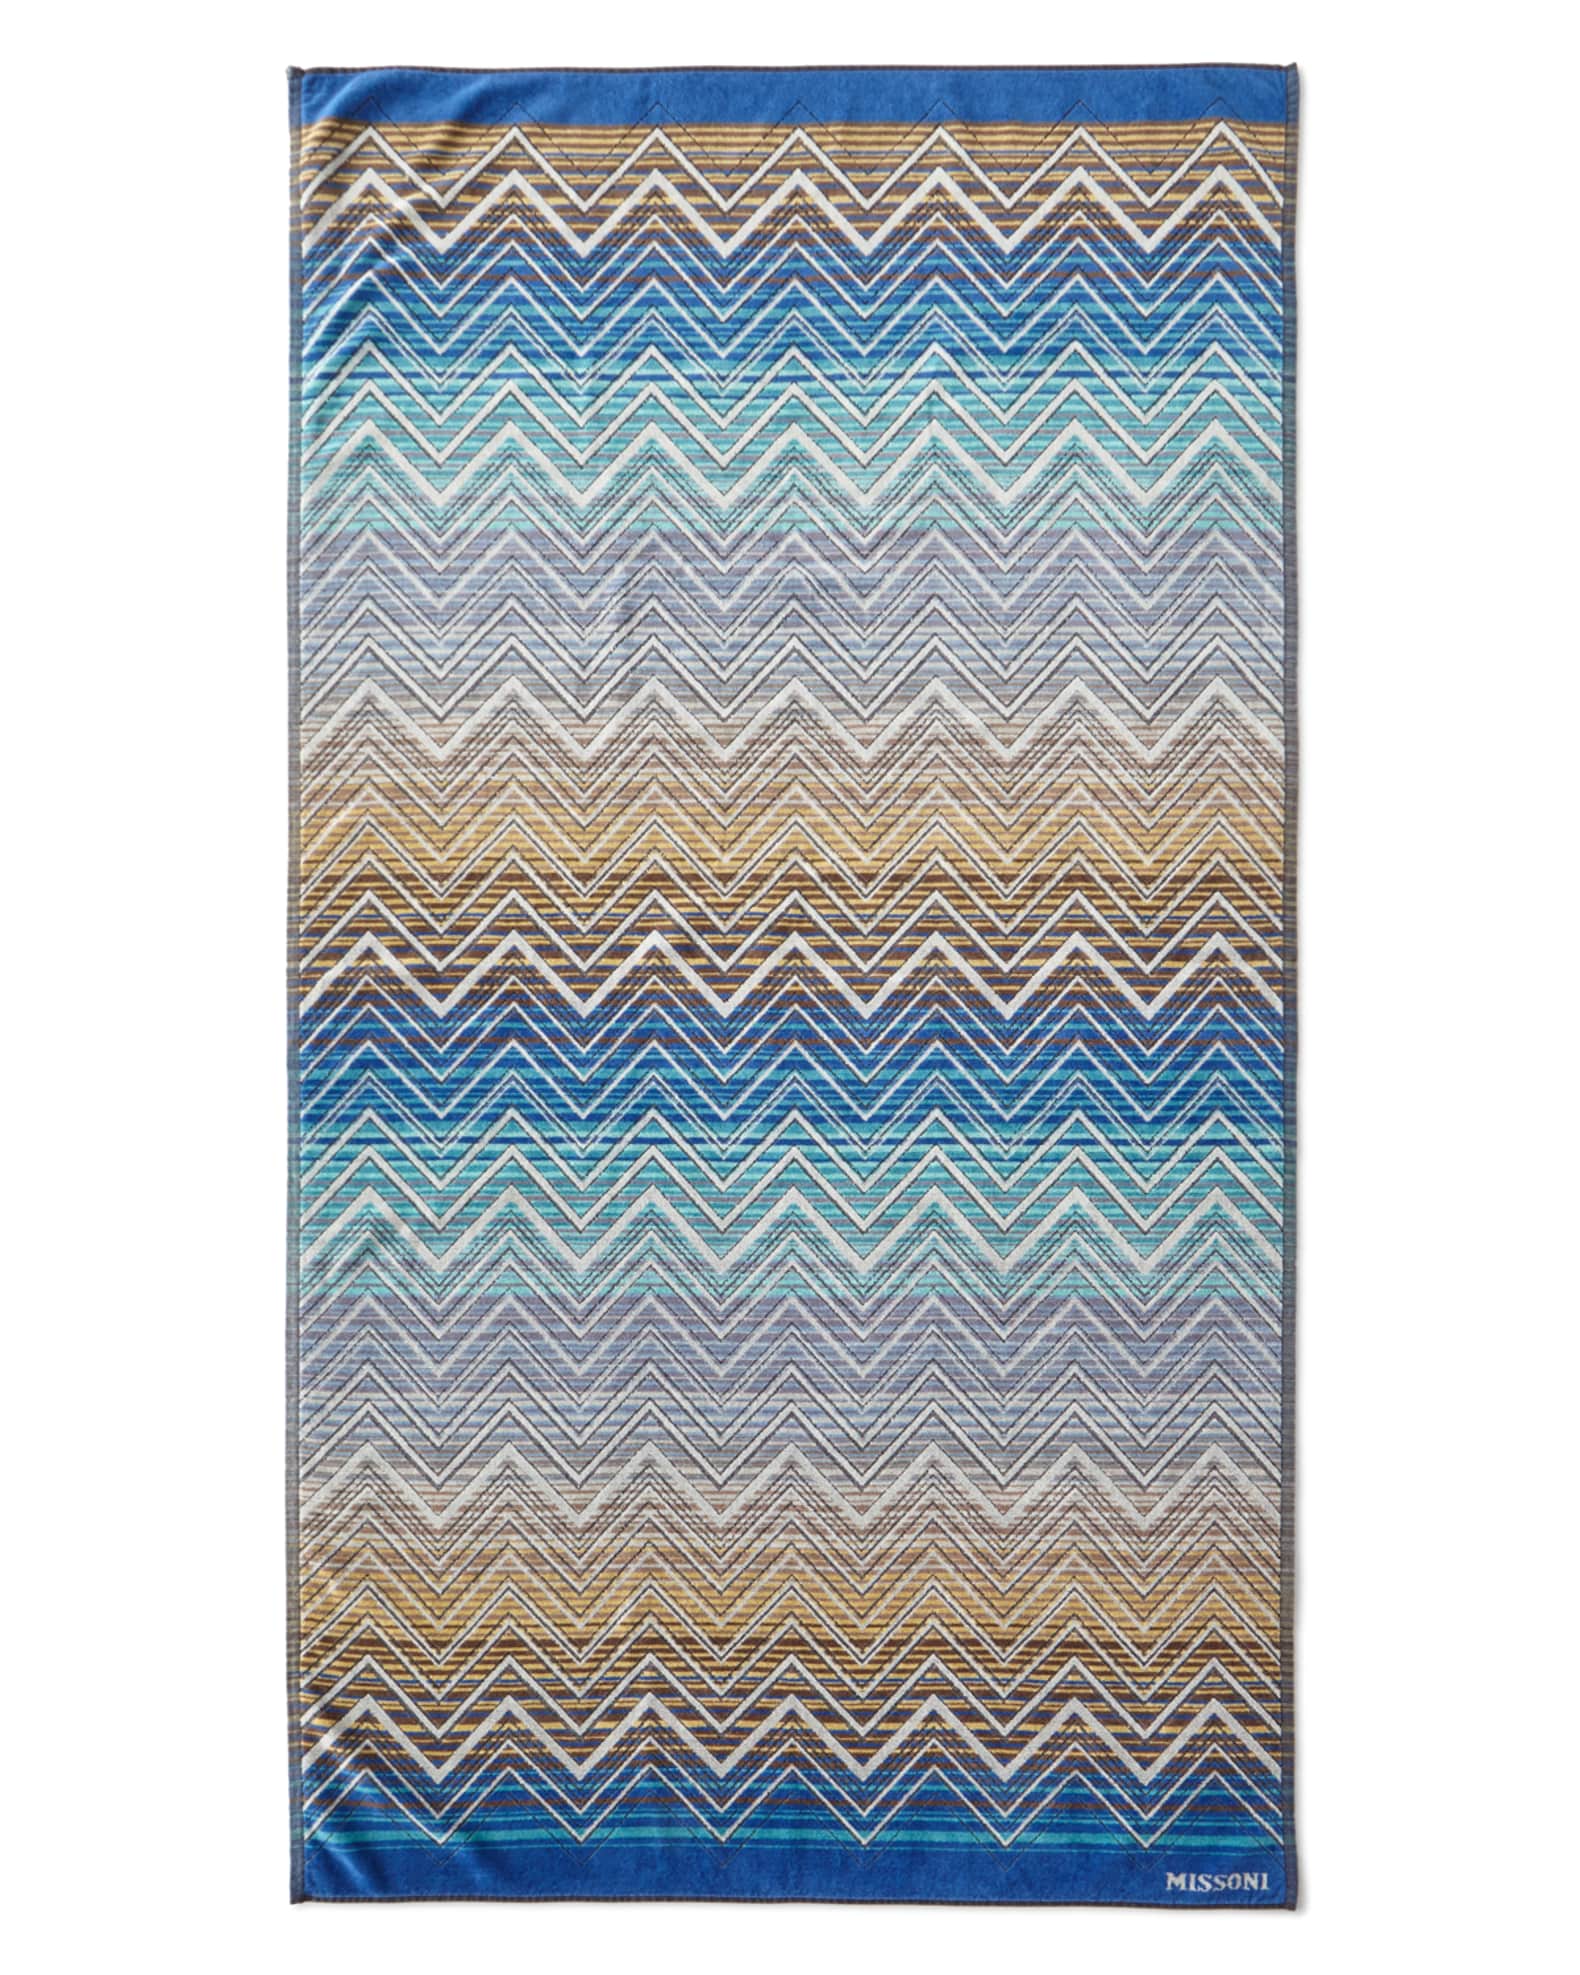 Details about   Missoni Home Tolomeo Towels Collection Blue 